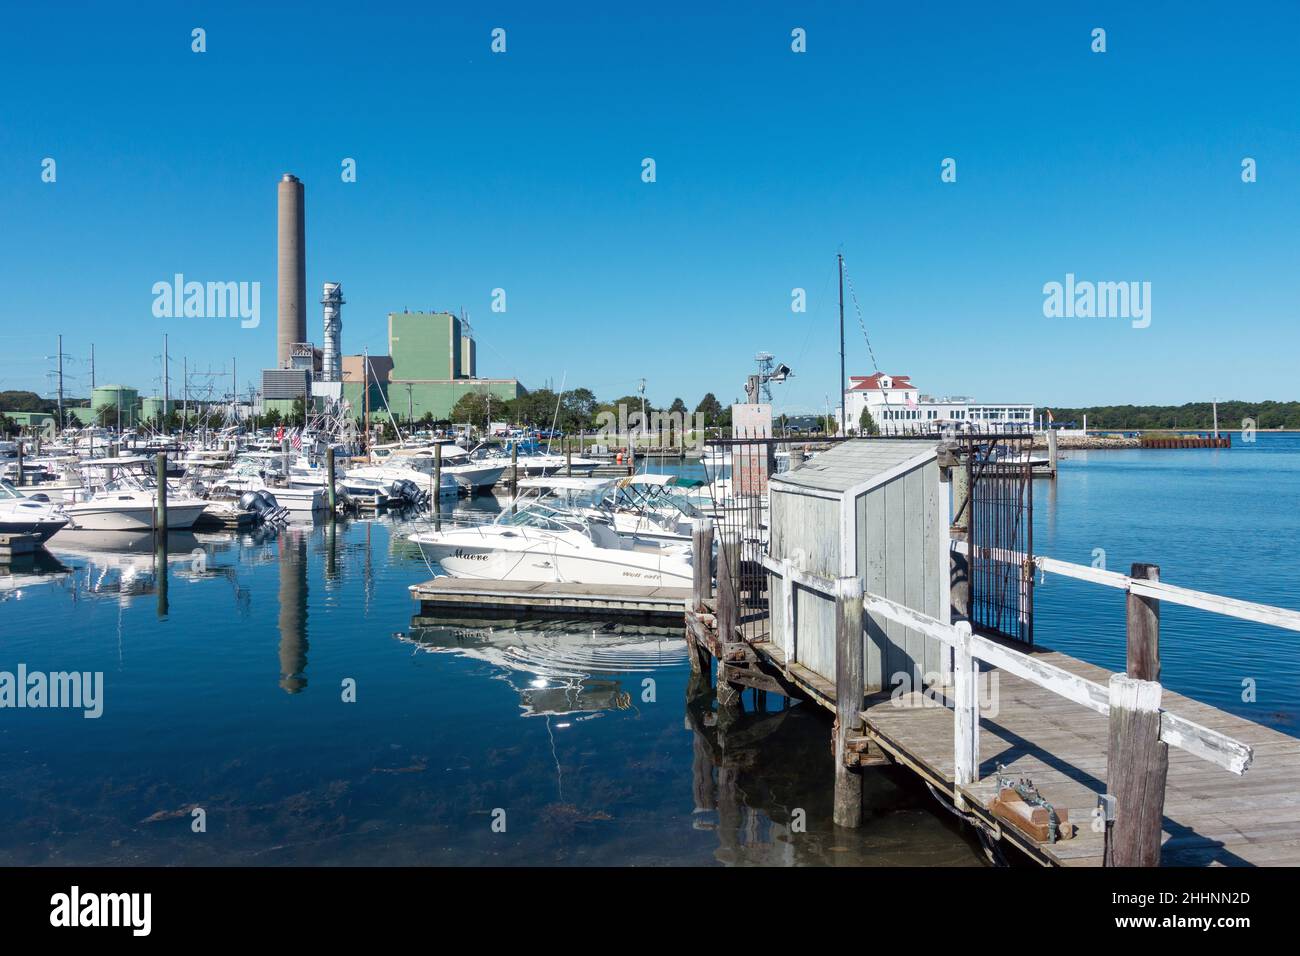 Sandwich Marina on Cape Cod, Massachusetts with many docked boats and power generating plant beyond Stock Photo